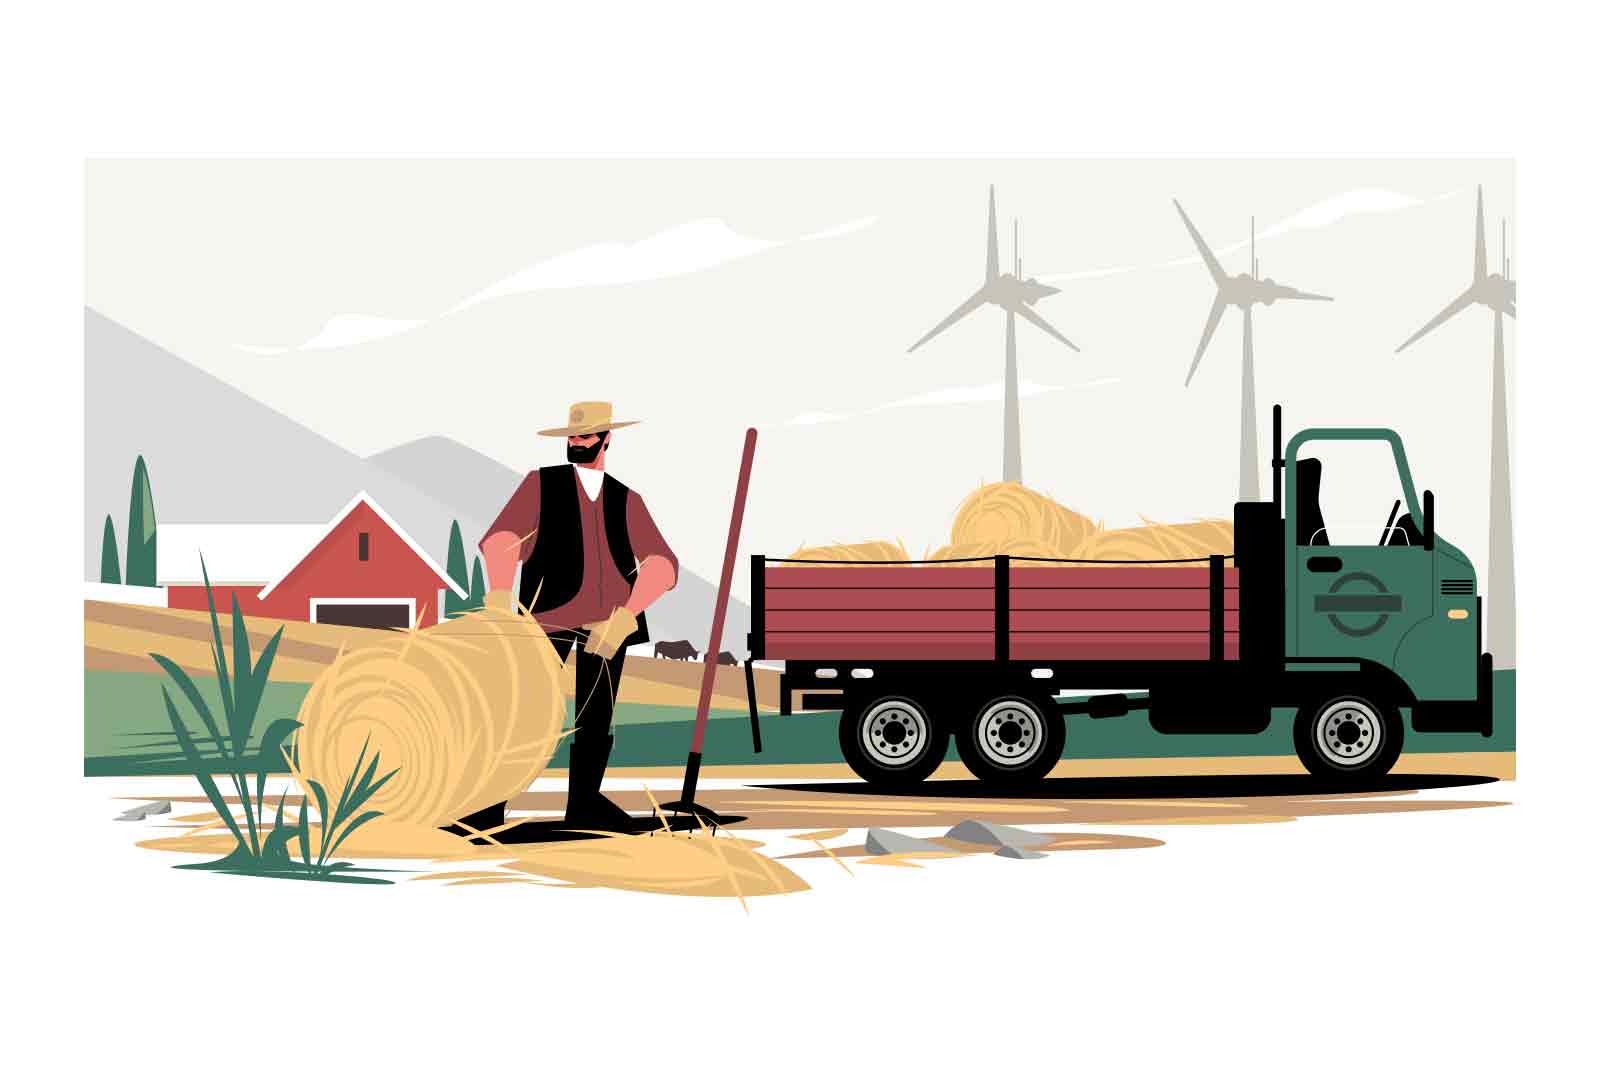 Man farmer getting round bales of hay in truck vector illustration. Mountains and windmills on background flat style concept. Eco farm idea